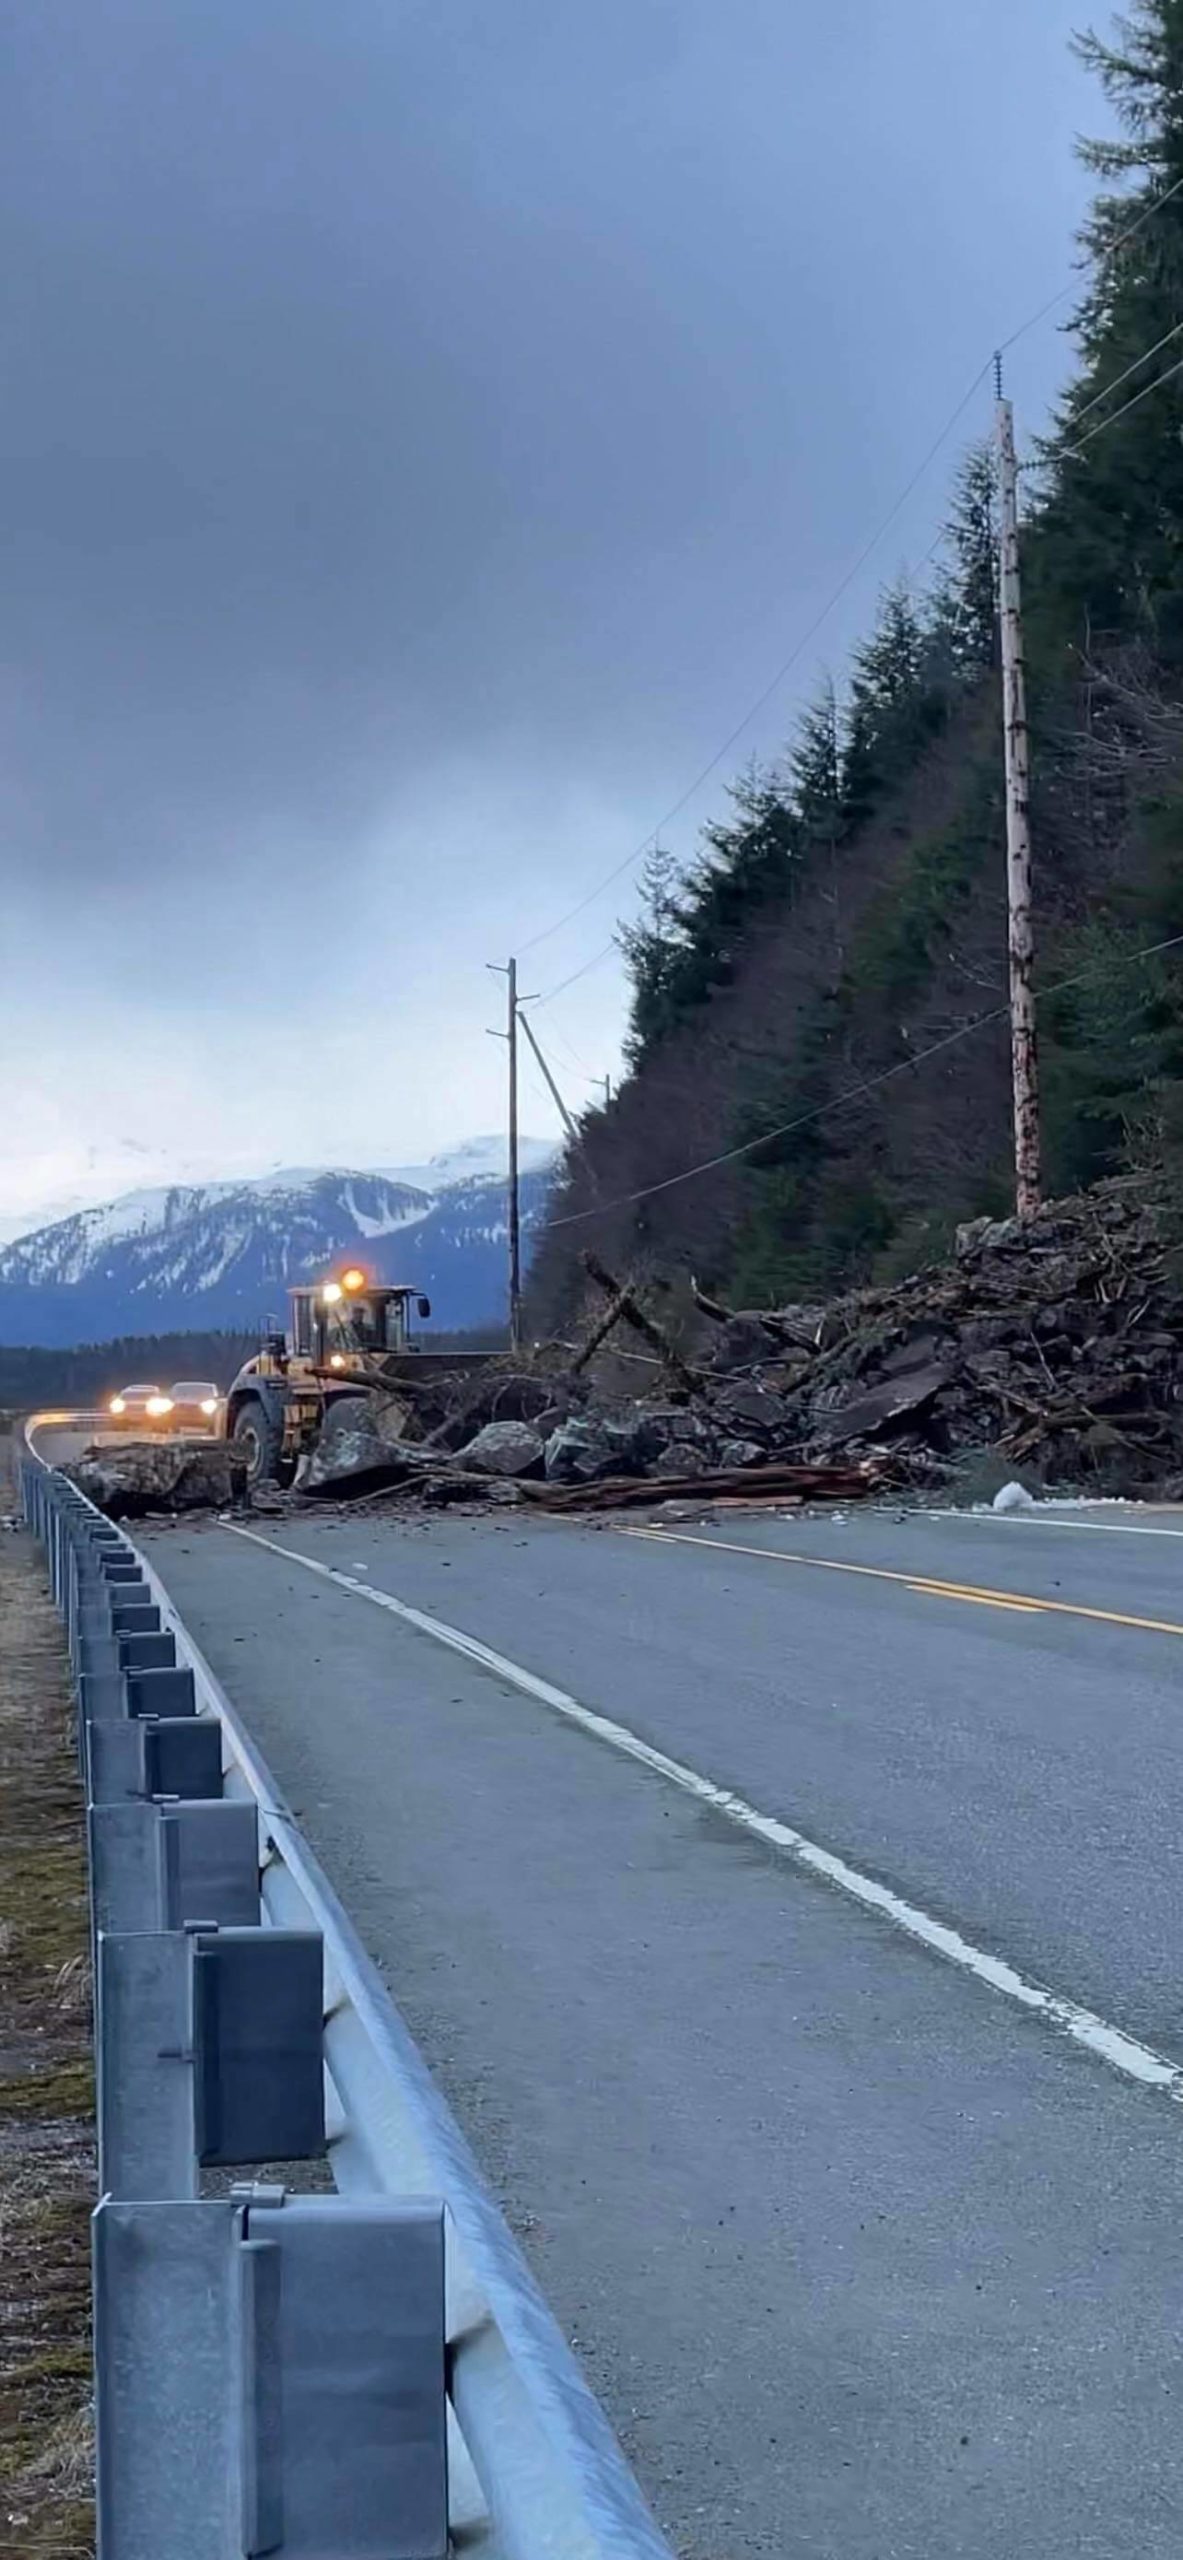 Department of Transportation and Public Facilities personnel clear rockslide debris from Douglas Highway on April 6, 2022. (Courtesy photo / Alana Davis)